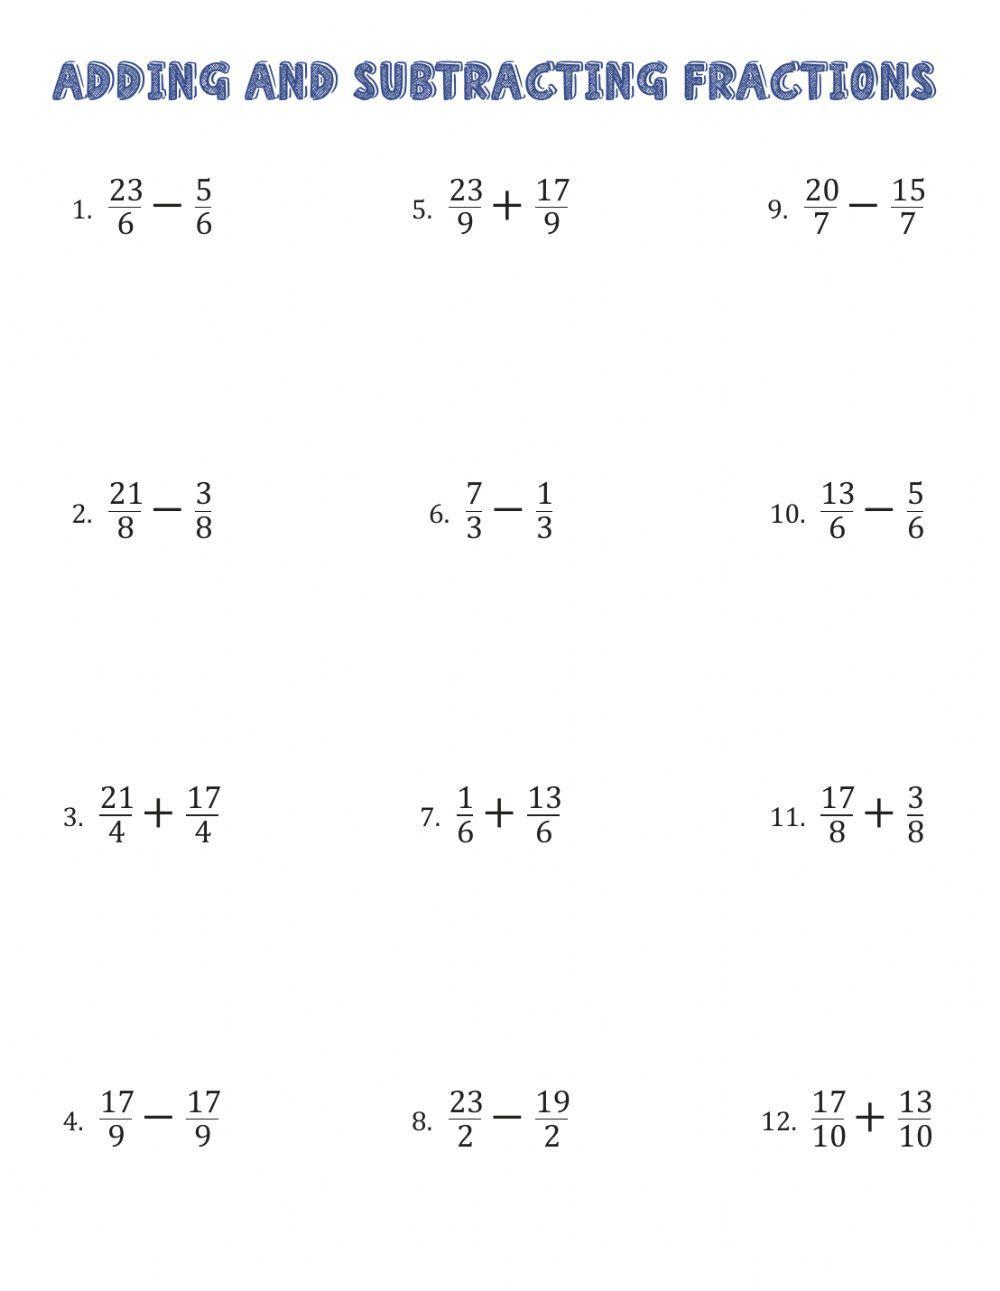 Operations with fractions